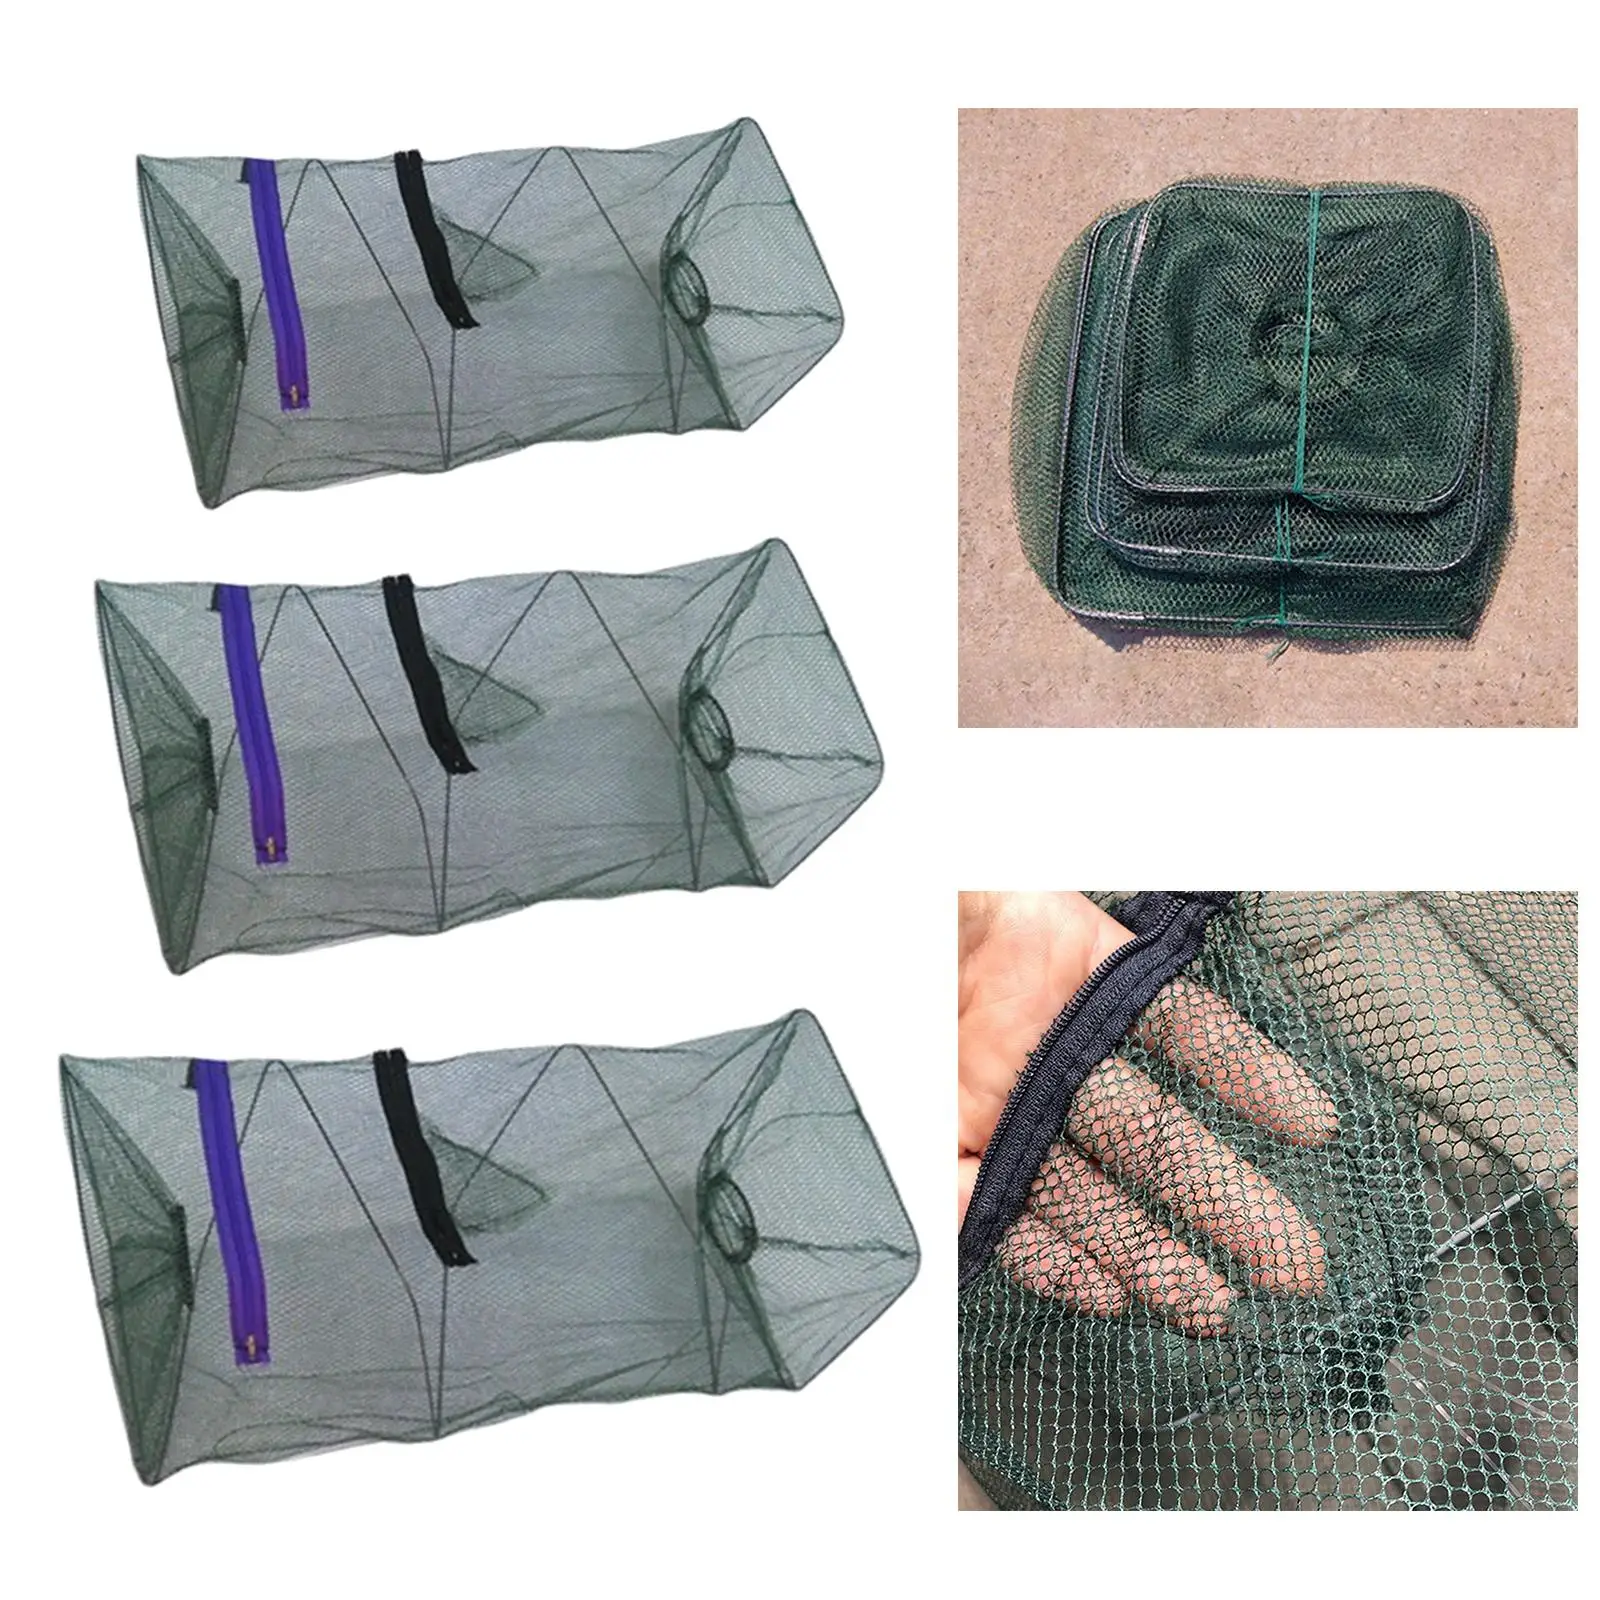 Professional Fishing Net Upgrade Fodable Net Fishing Mesh Easy to Use Net for Outdoor